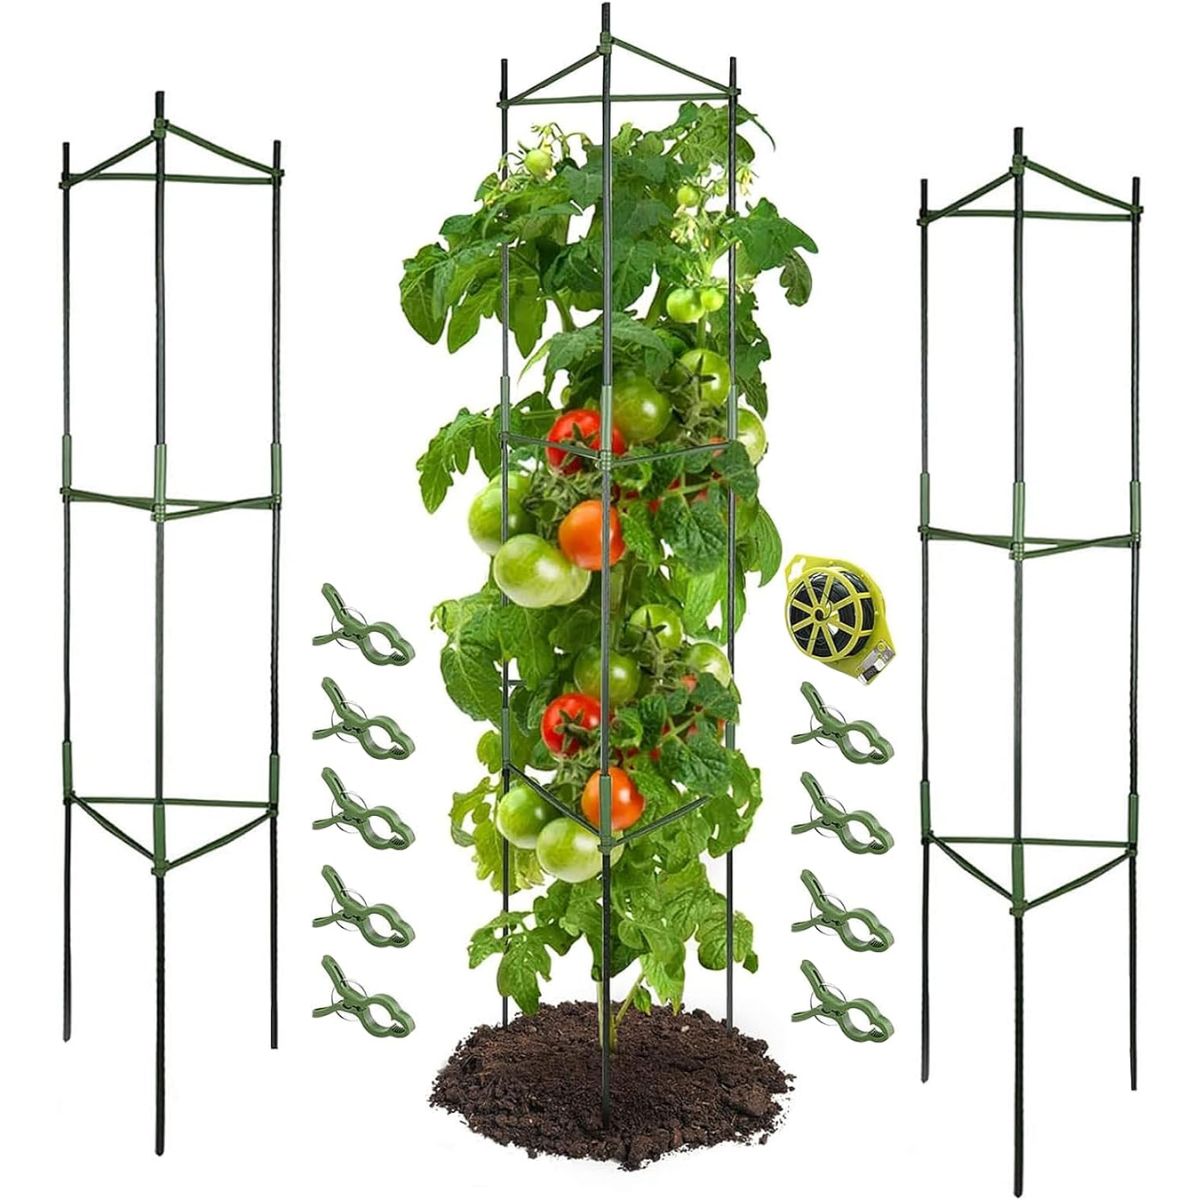 Growneer Tomato Cages with one tomato plant growing